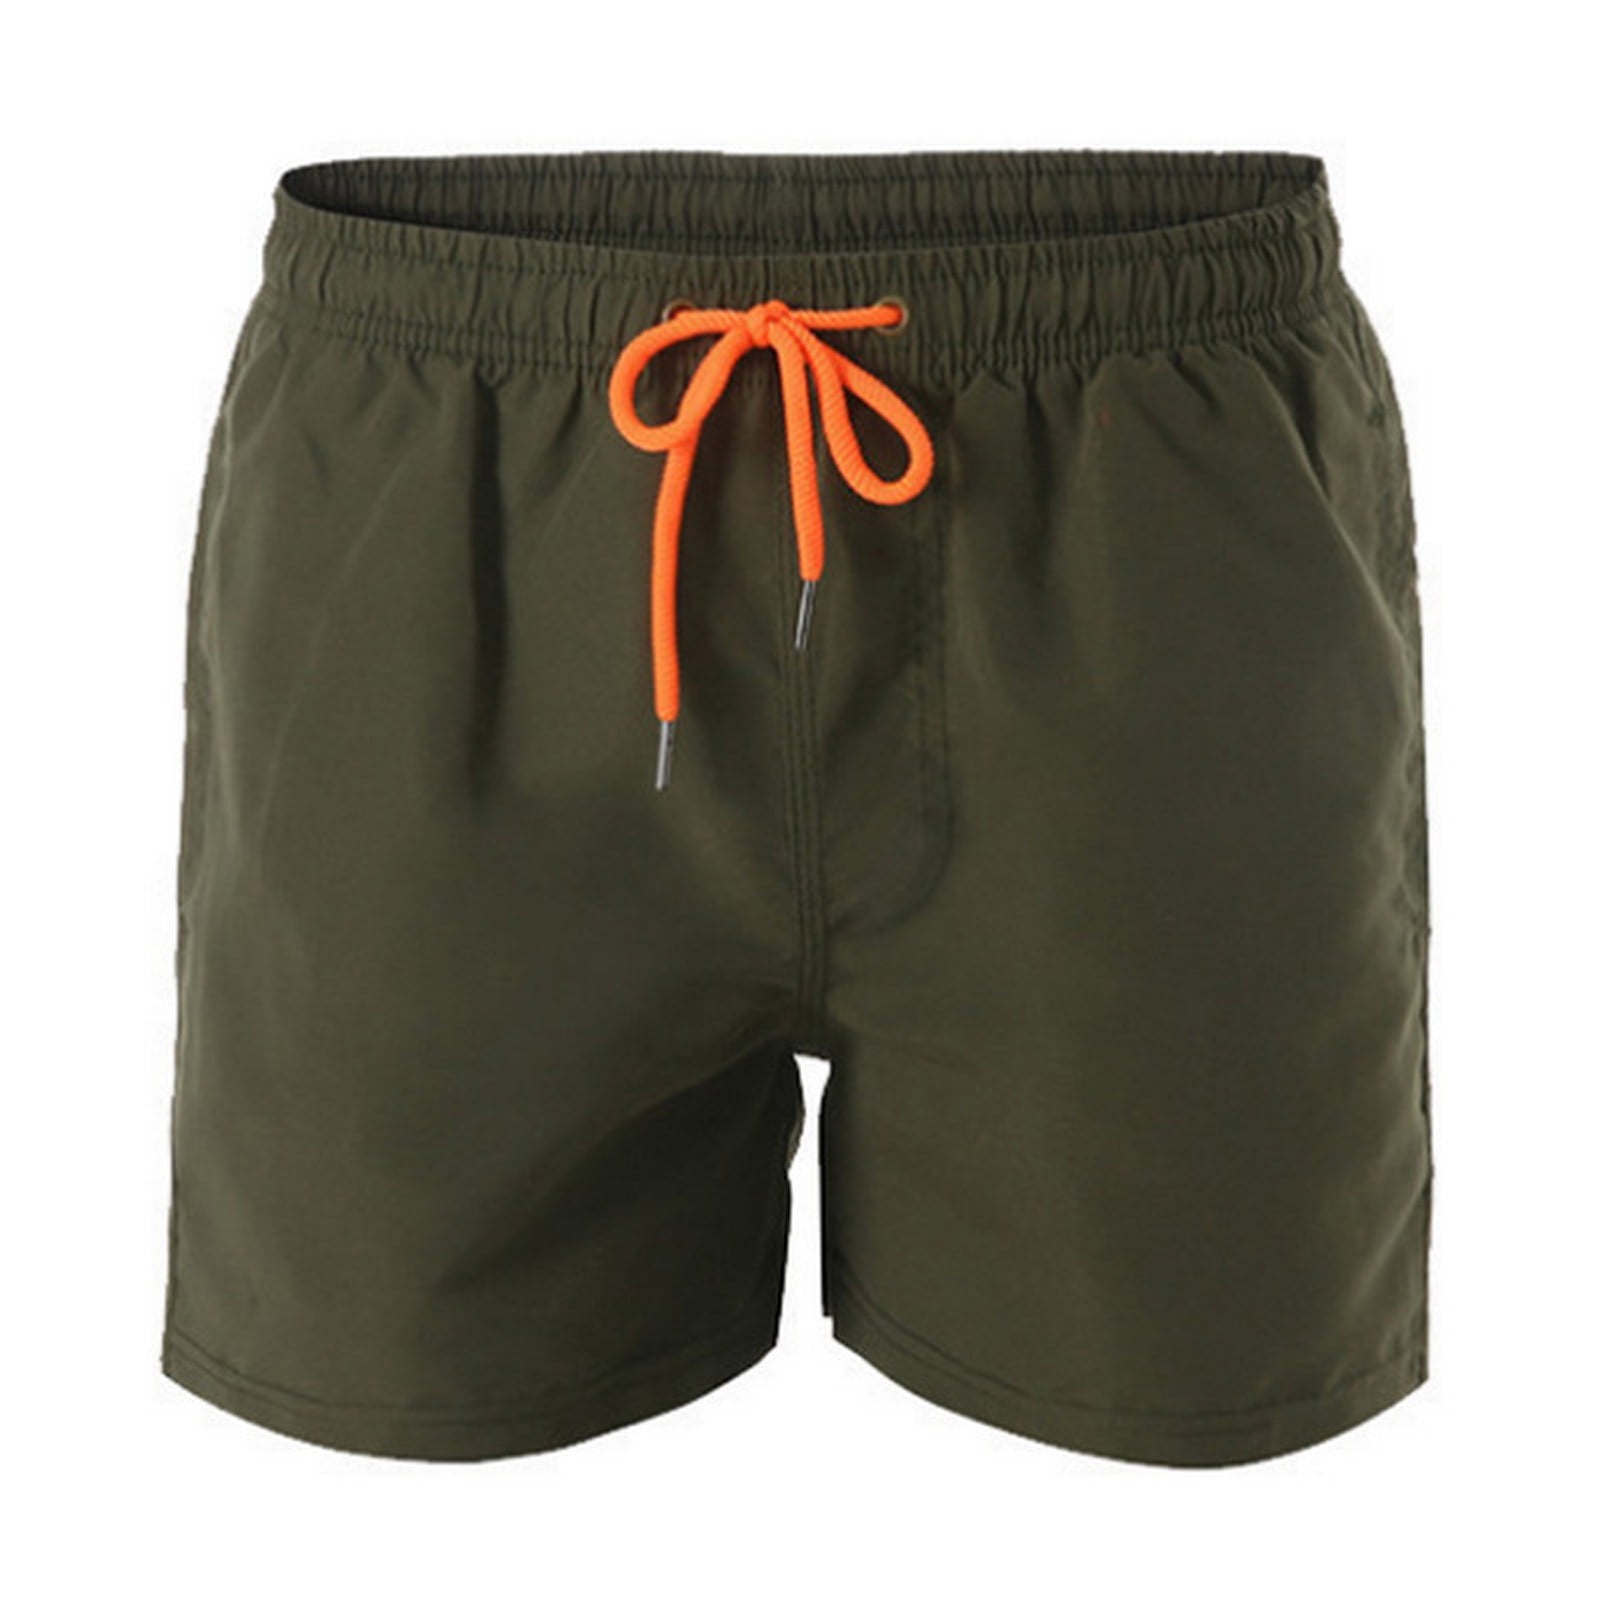 Baocc Mens Swim Trunks Quick Dry Board Shorts with Mesh Lining ...